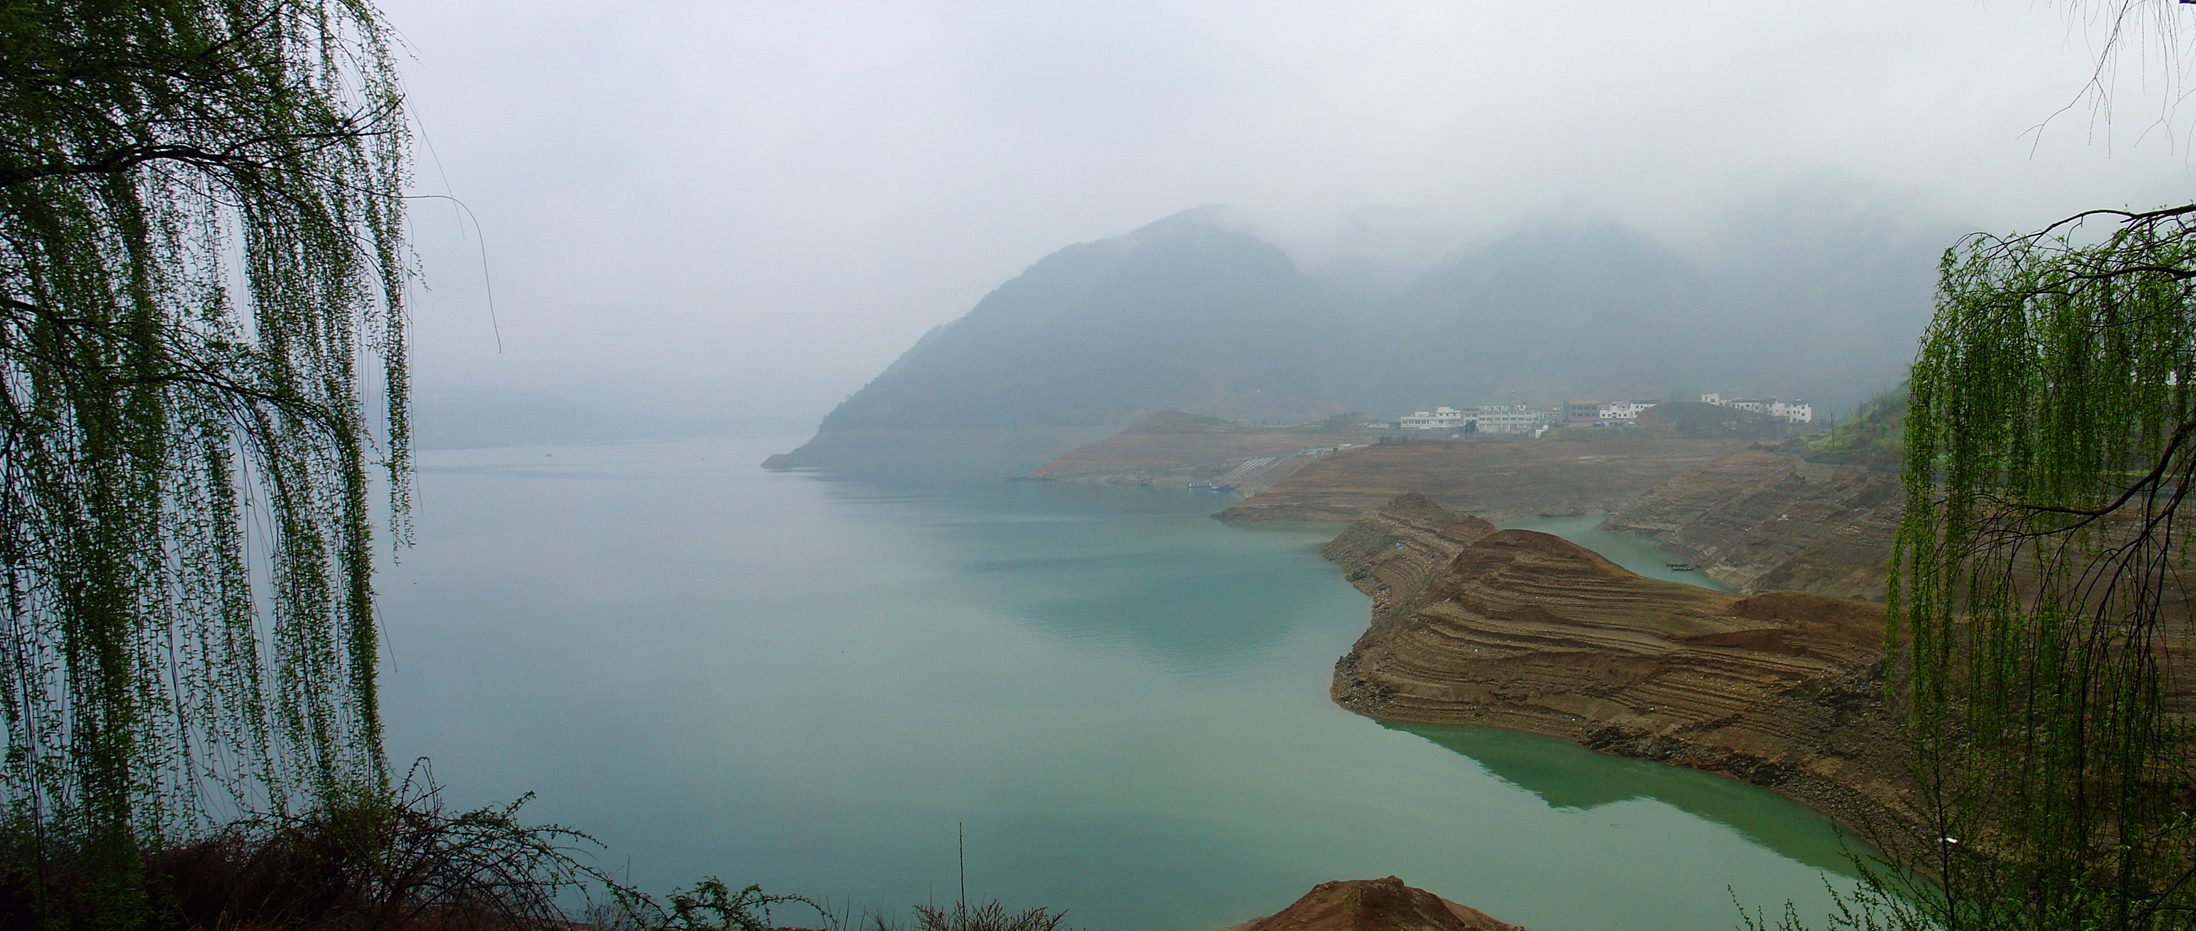 A huge dammed lake, which is important for power supply in Qingchuan